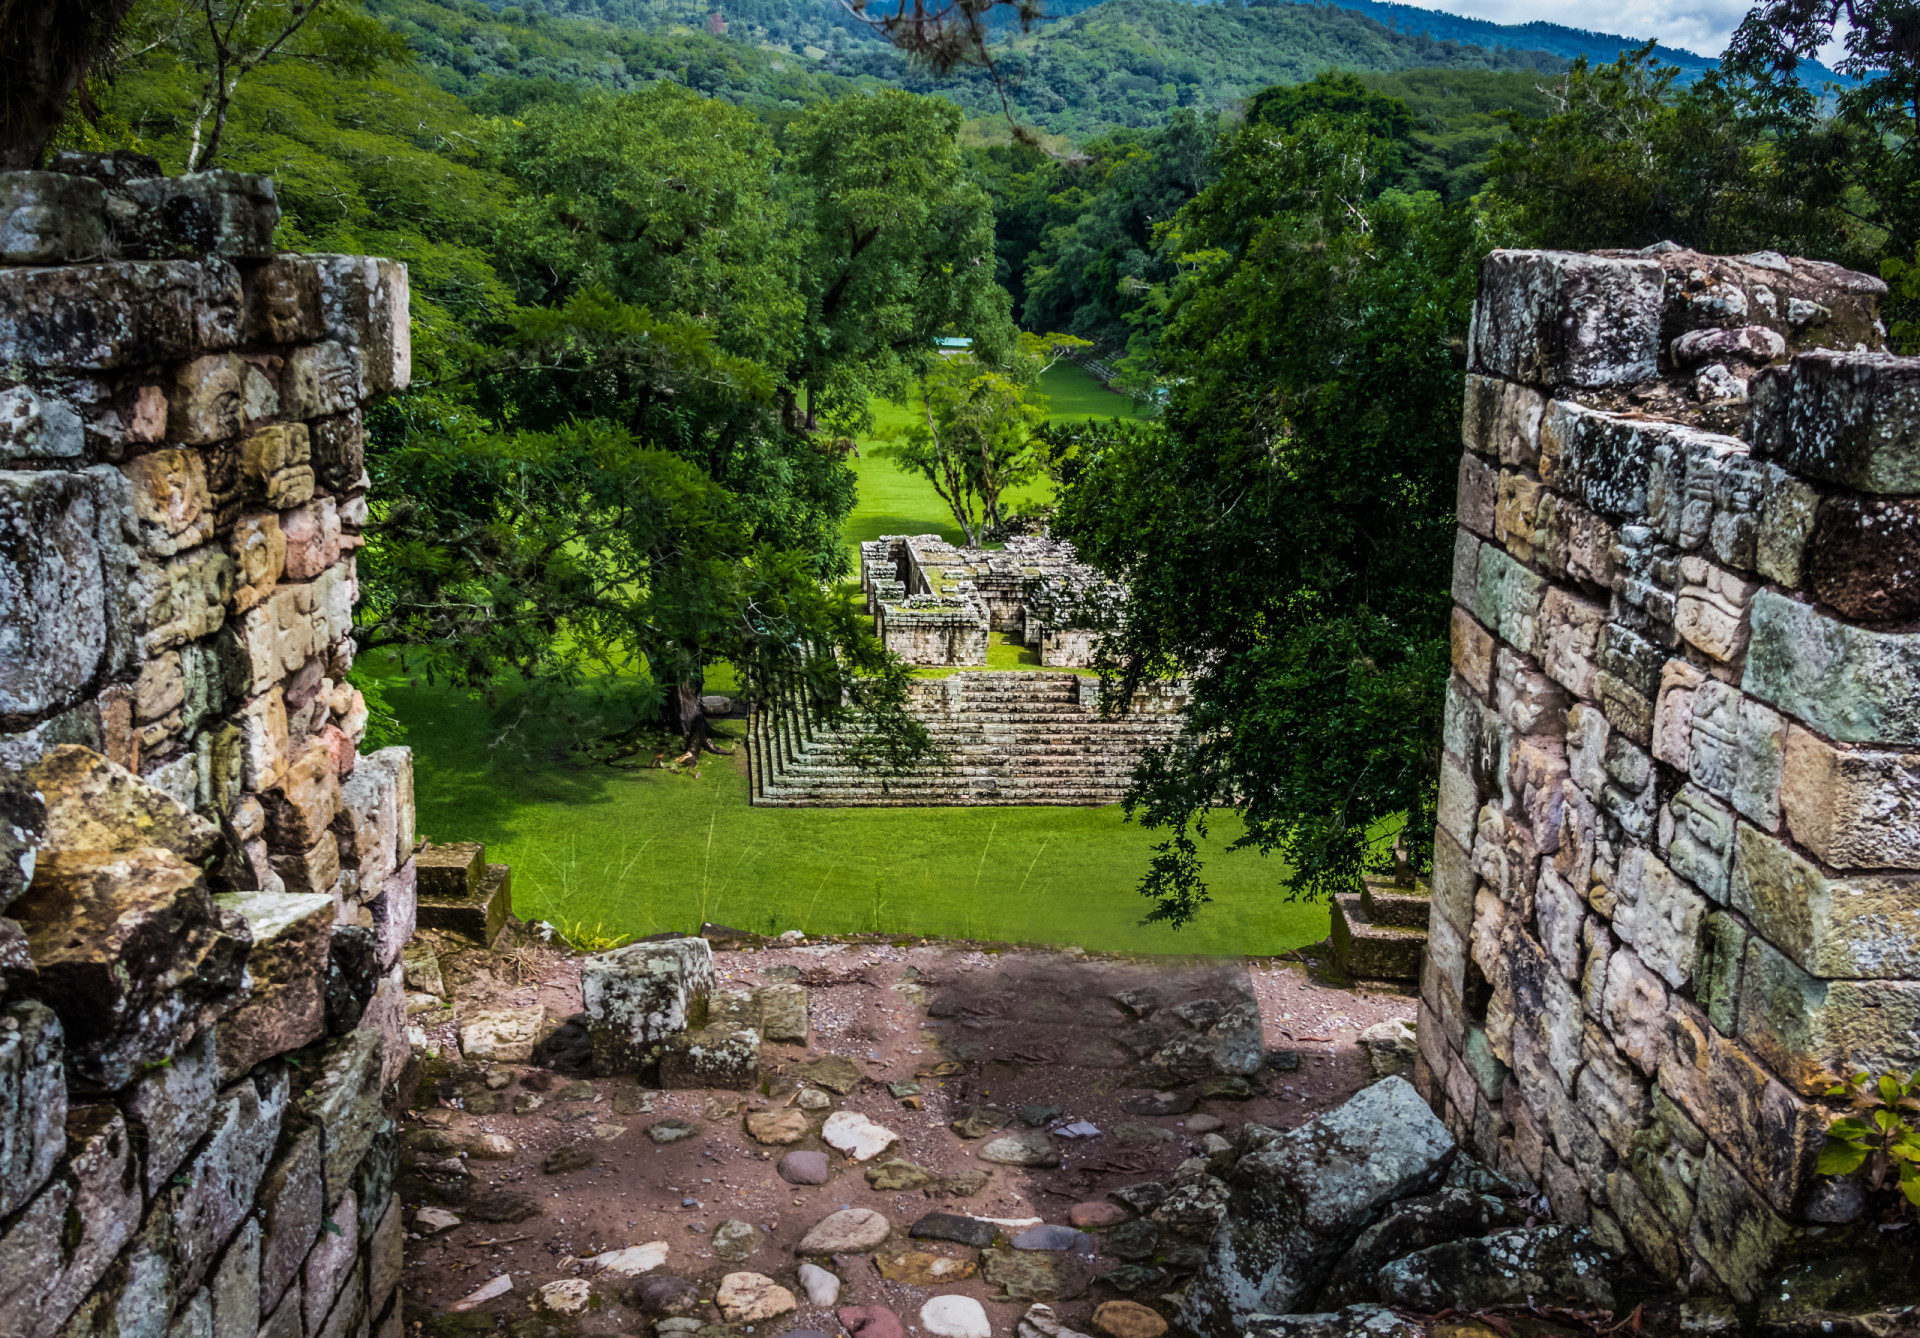 <p>The Copán archaeological ruins are also protected as a UNESCO World Heritage Site, and for good reason! Copán is one of the most important sites of the Mayan civilization.</p>